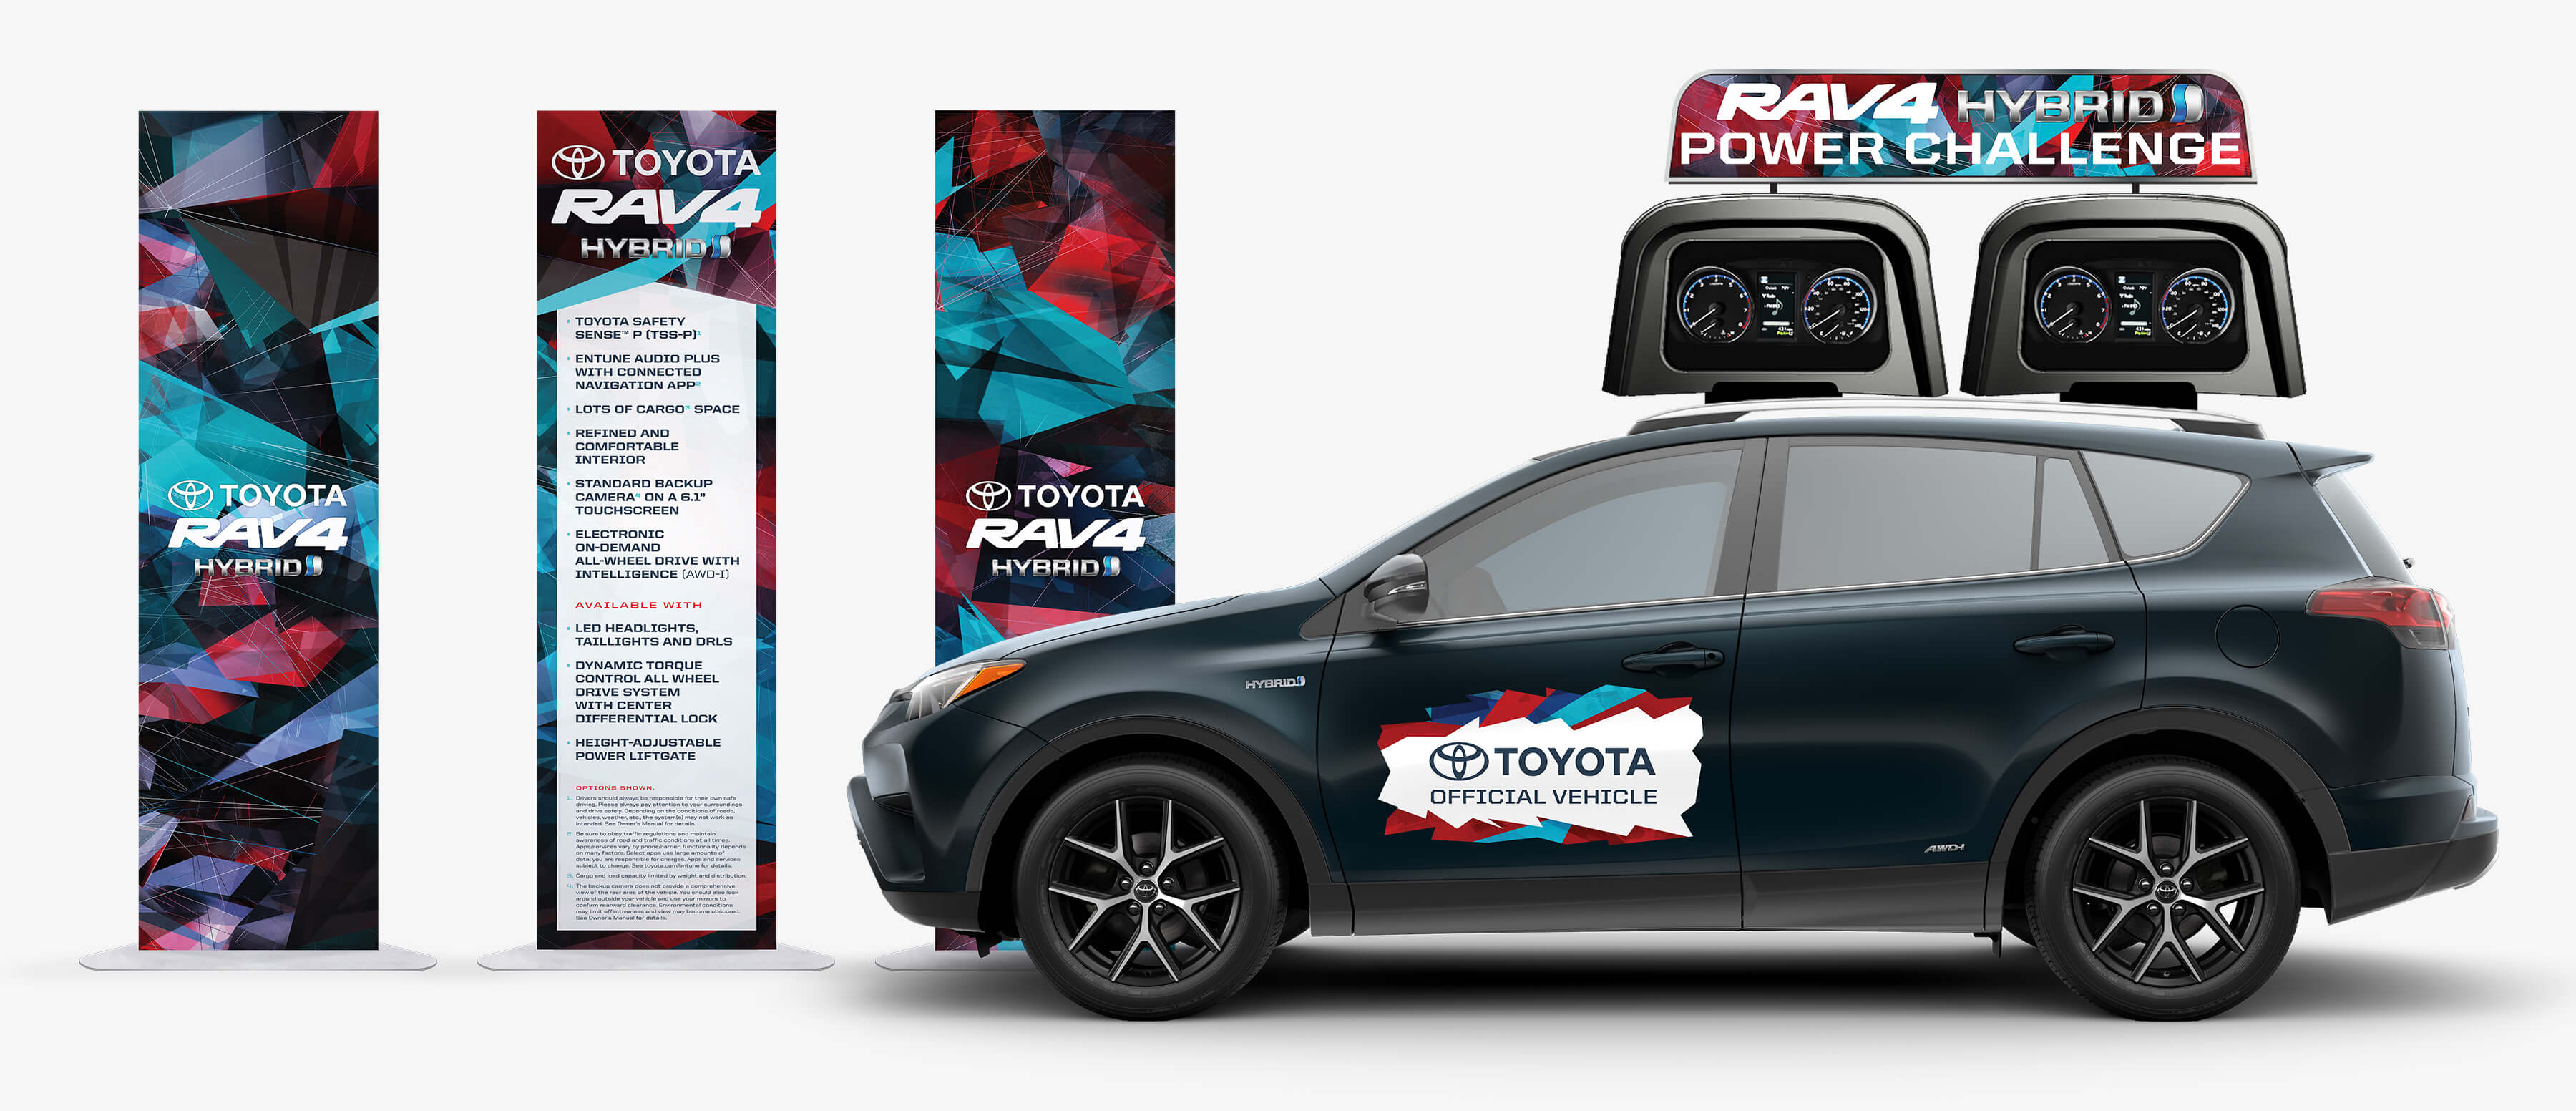 Toyota Rav4 Hybrid Power Challenge items featuring the 2x7 TFE sign, car topper, and door magnet.